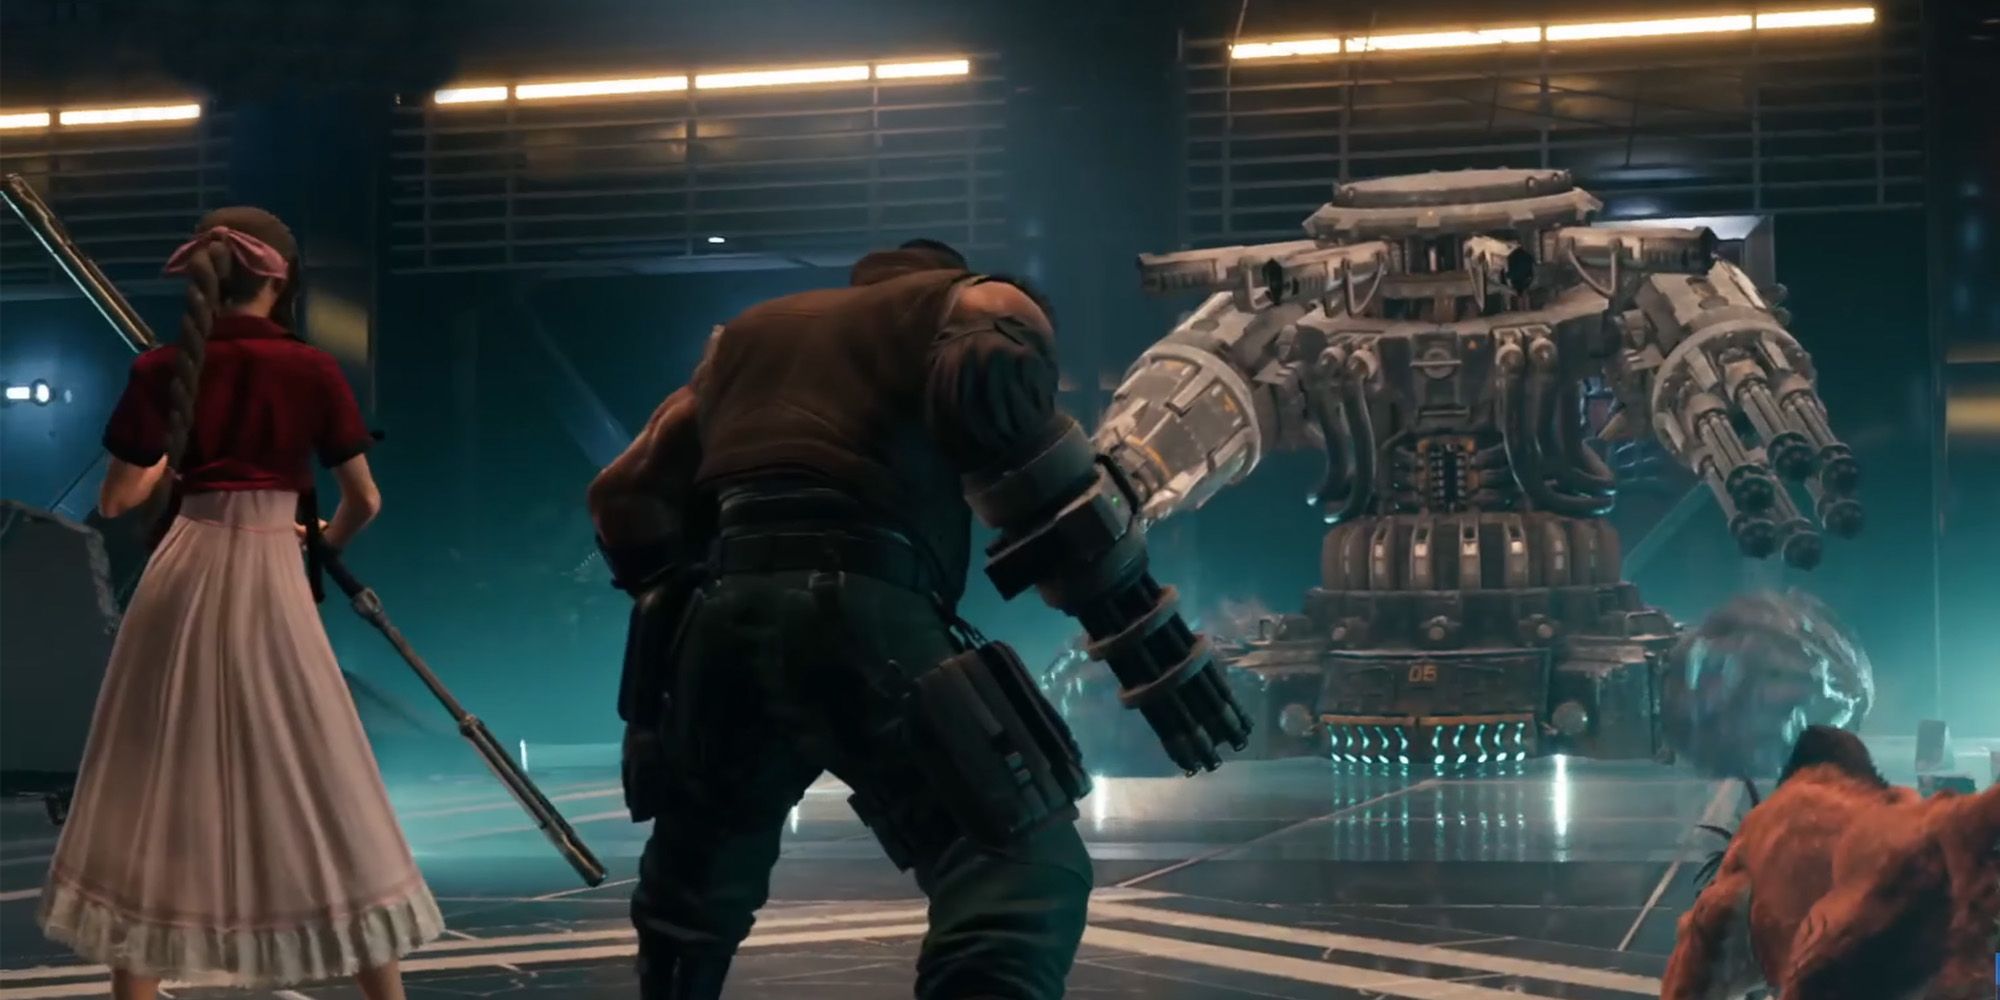 The second phase of the battle with the Arsenal in Final Fantasy VII Remake